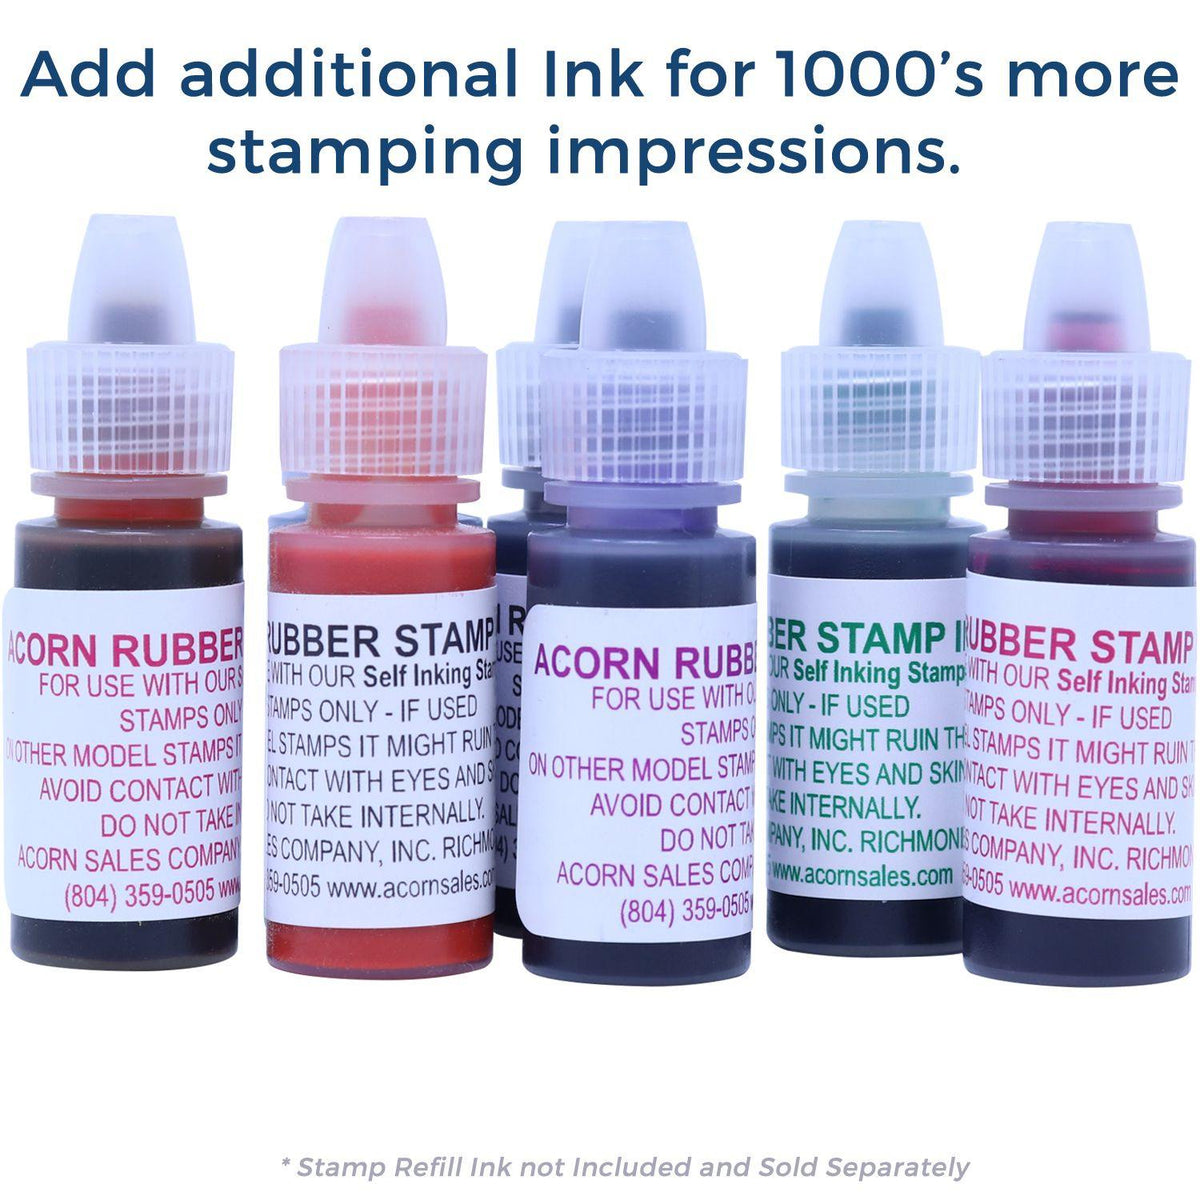 Refill Inks for Large Pre-Inked Draft with Letter Stamp Available